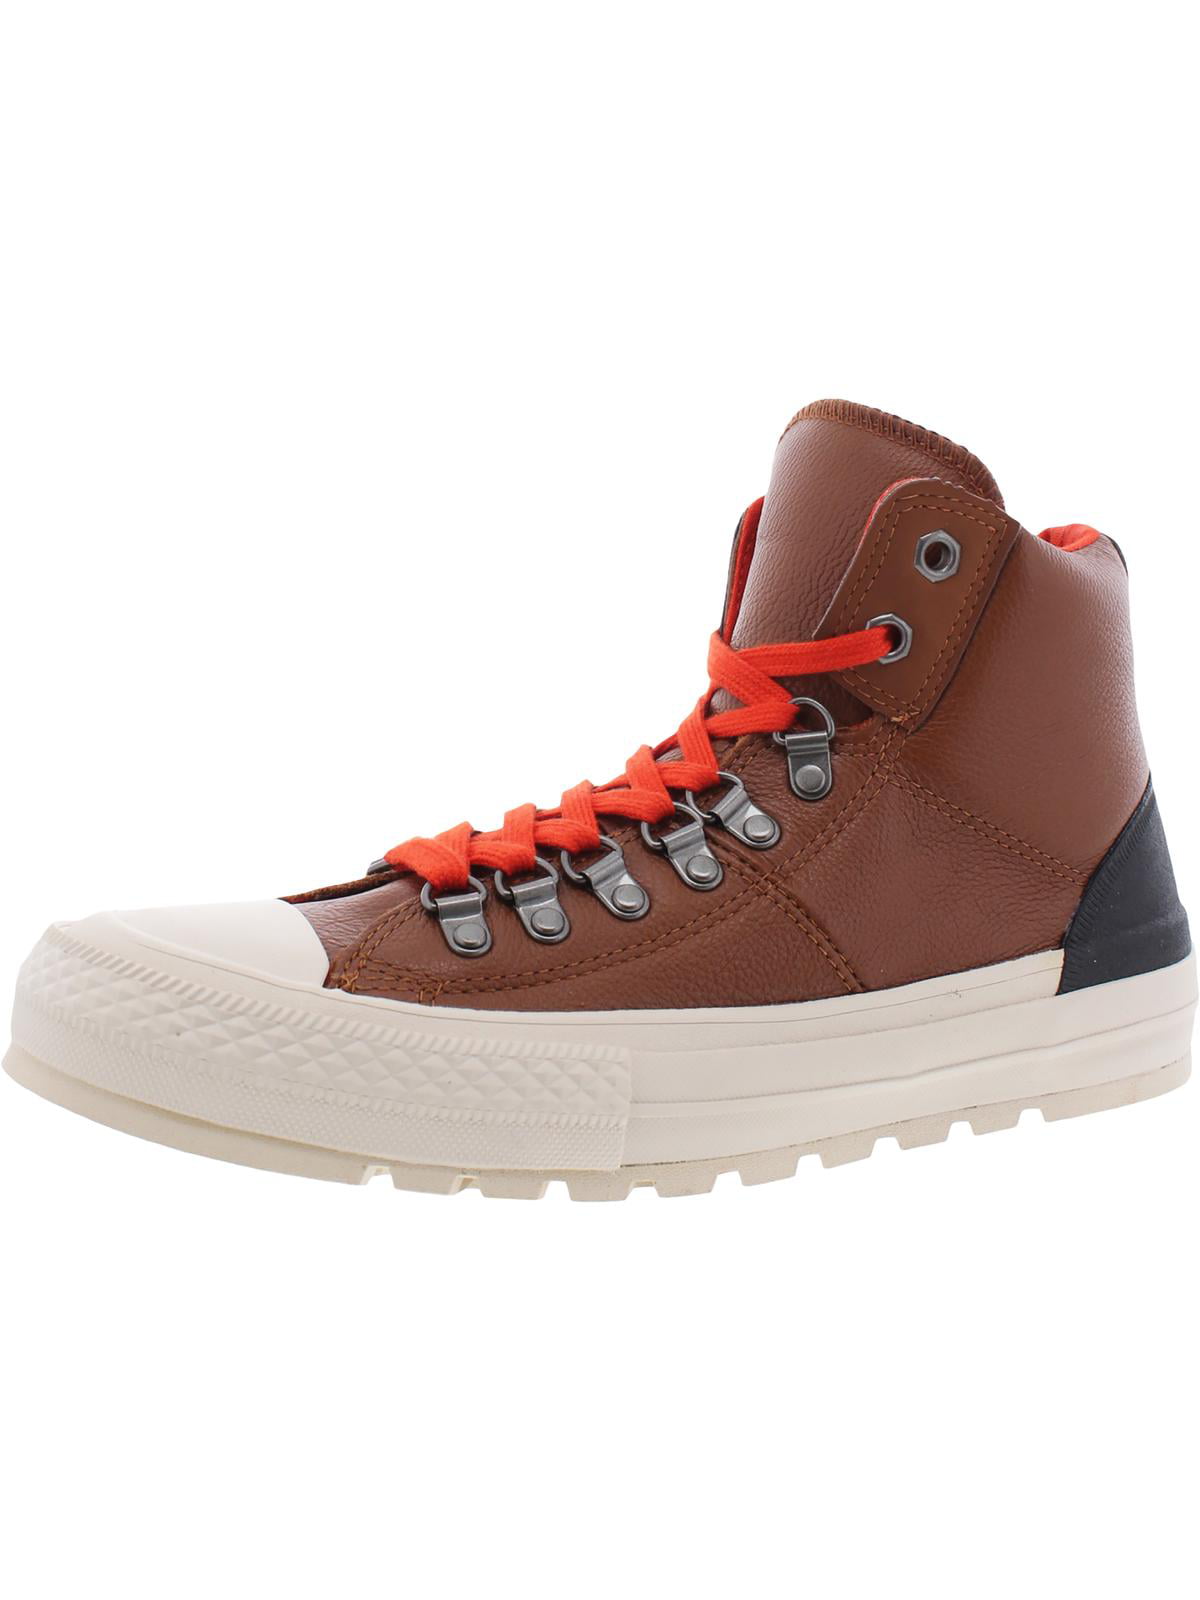 converse hiker leather